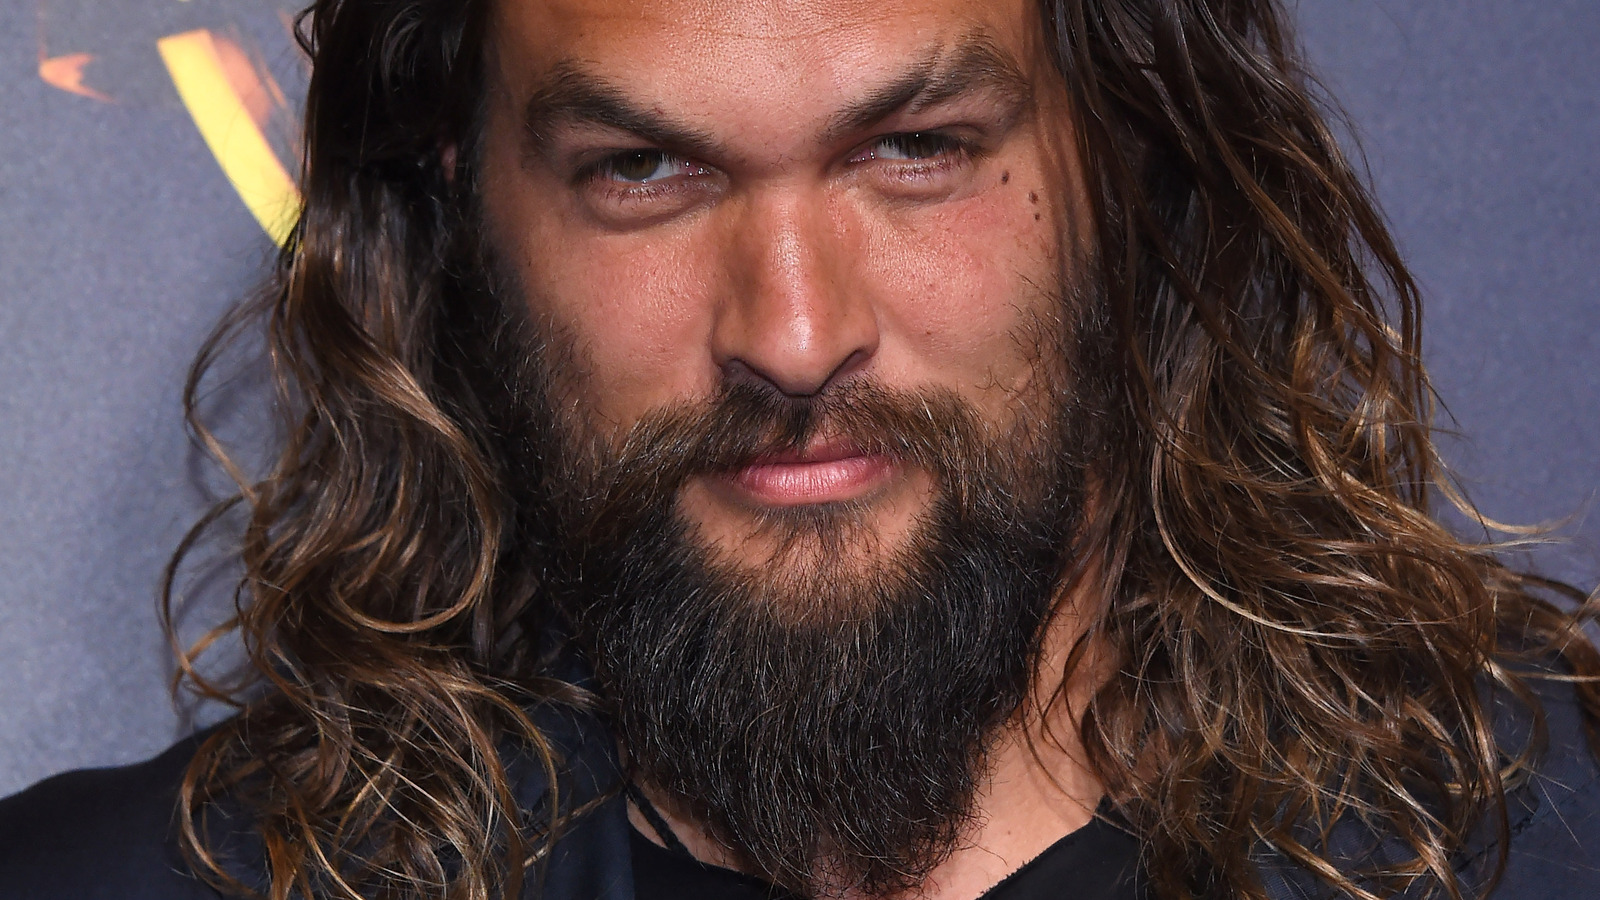 The Truth About Jason Momoa's Relationship With Amber Heard